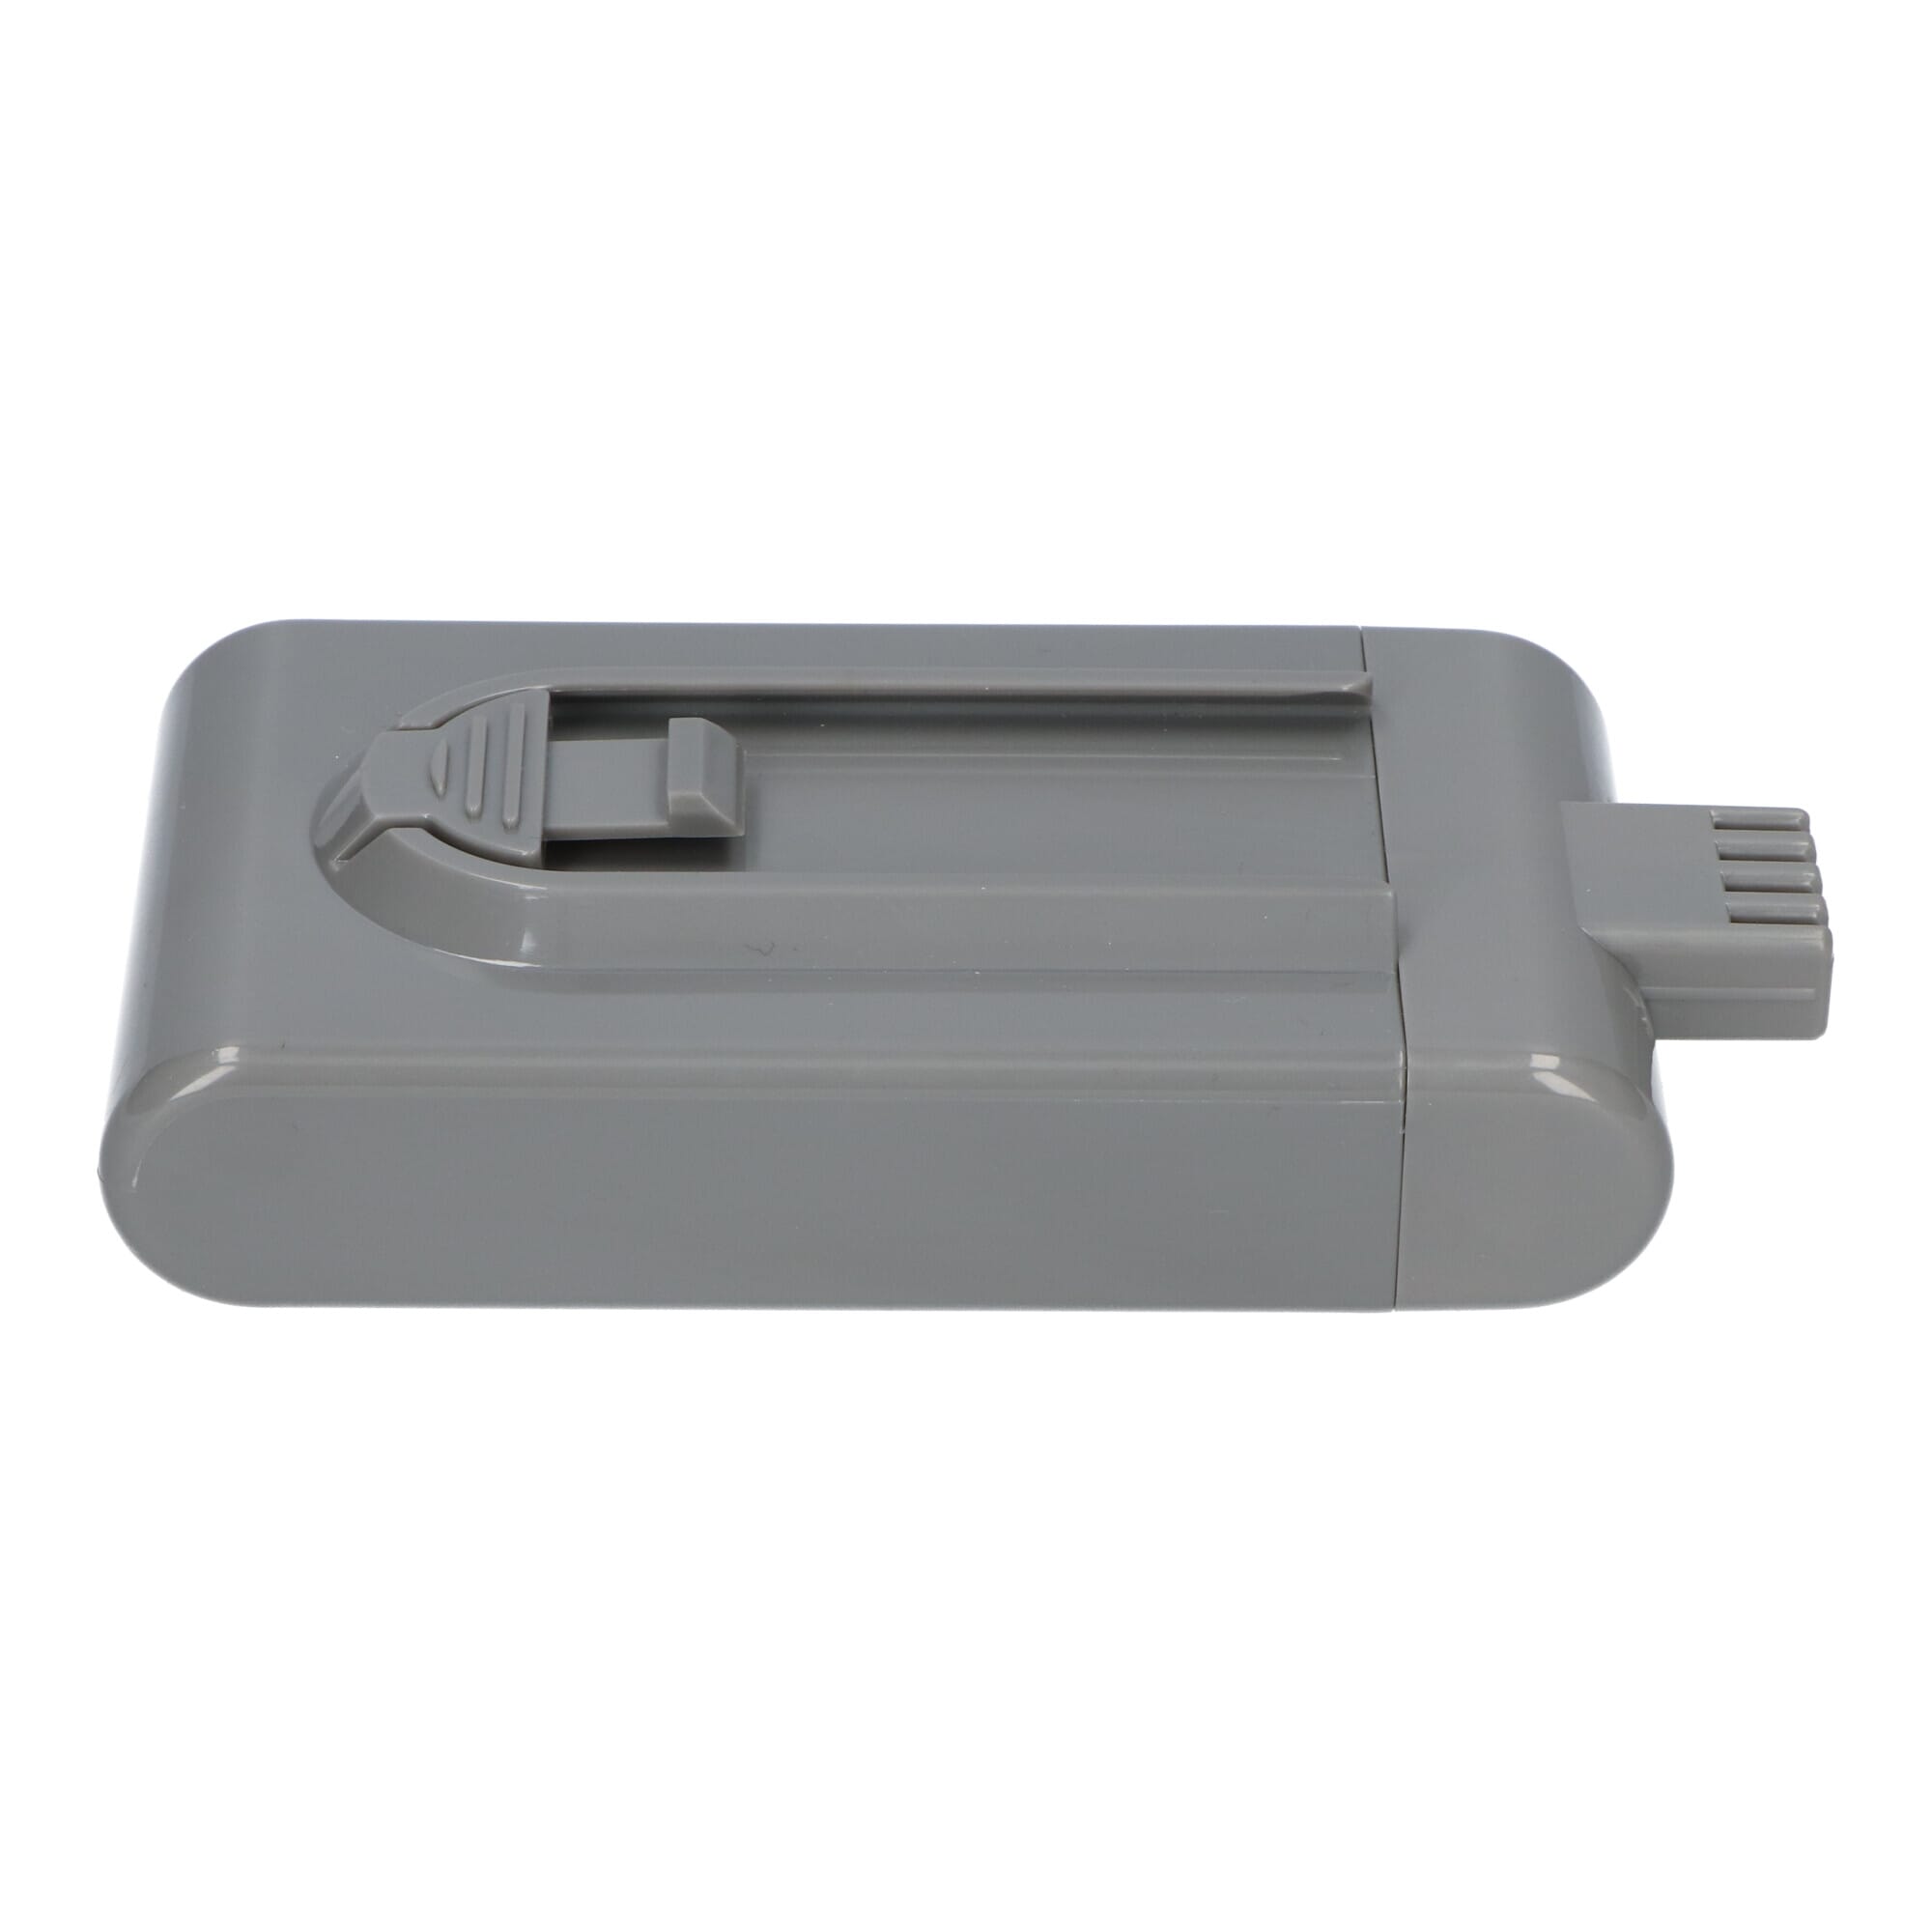 Stofzuiger Accu 2000mAh voor Dyson DC16 (P0685738) - ReplaceDirect.nl